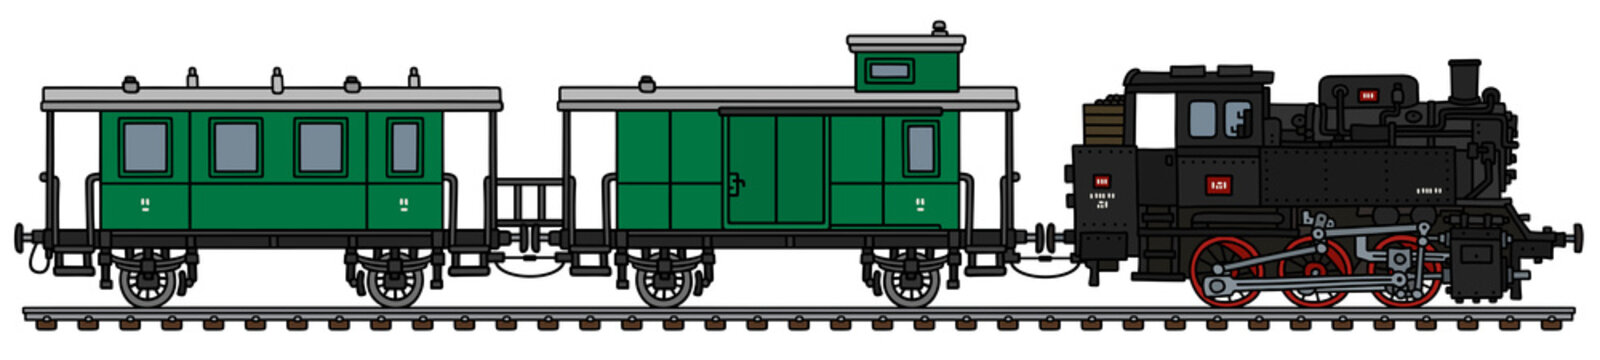 The vectorized hand drawing of a vintage green personal steam train